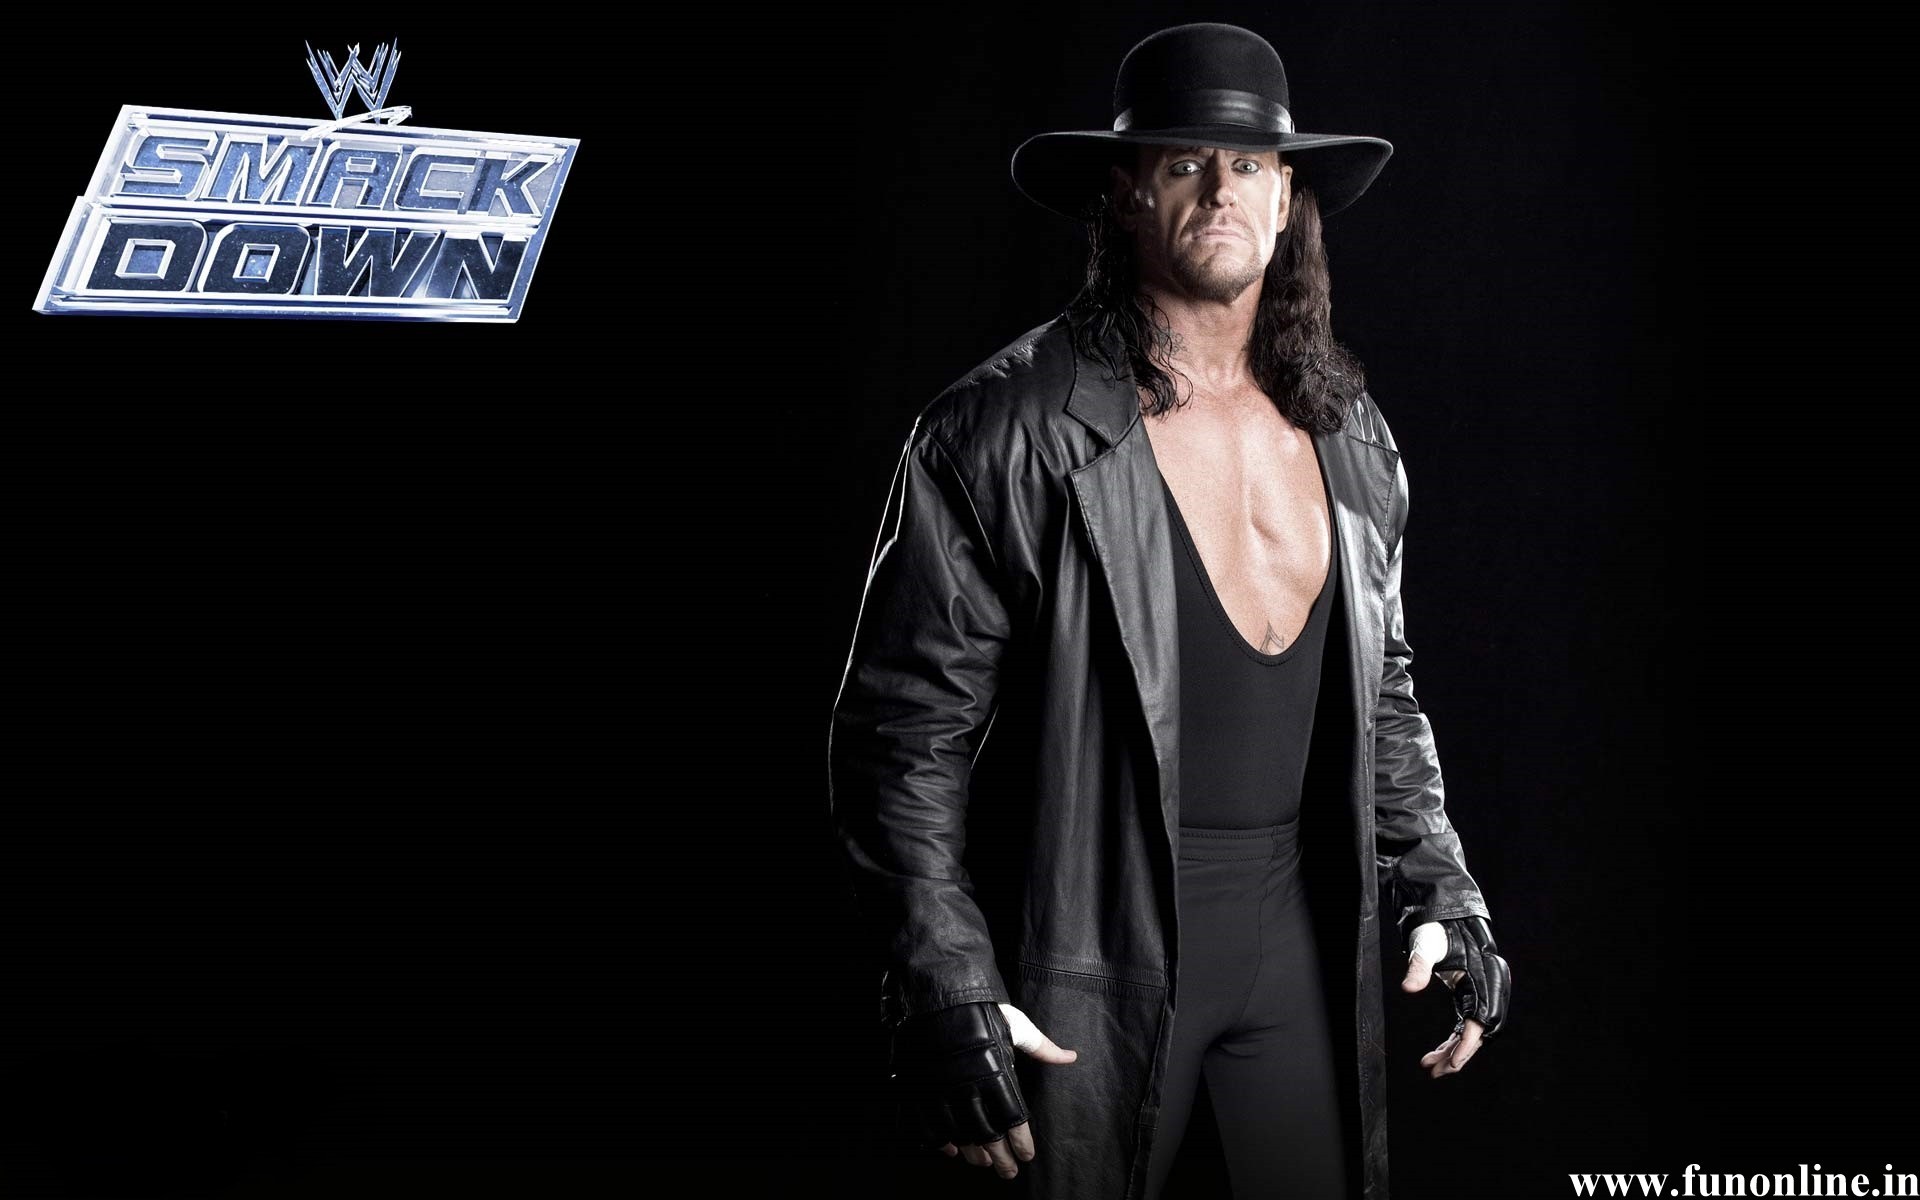 The Undertaker Wallpaper 2018 (56+ images)